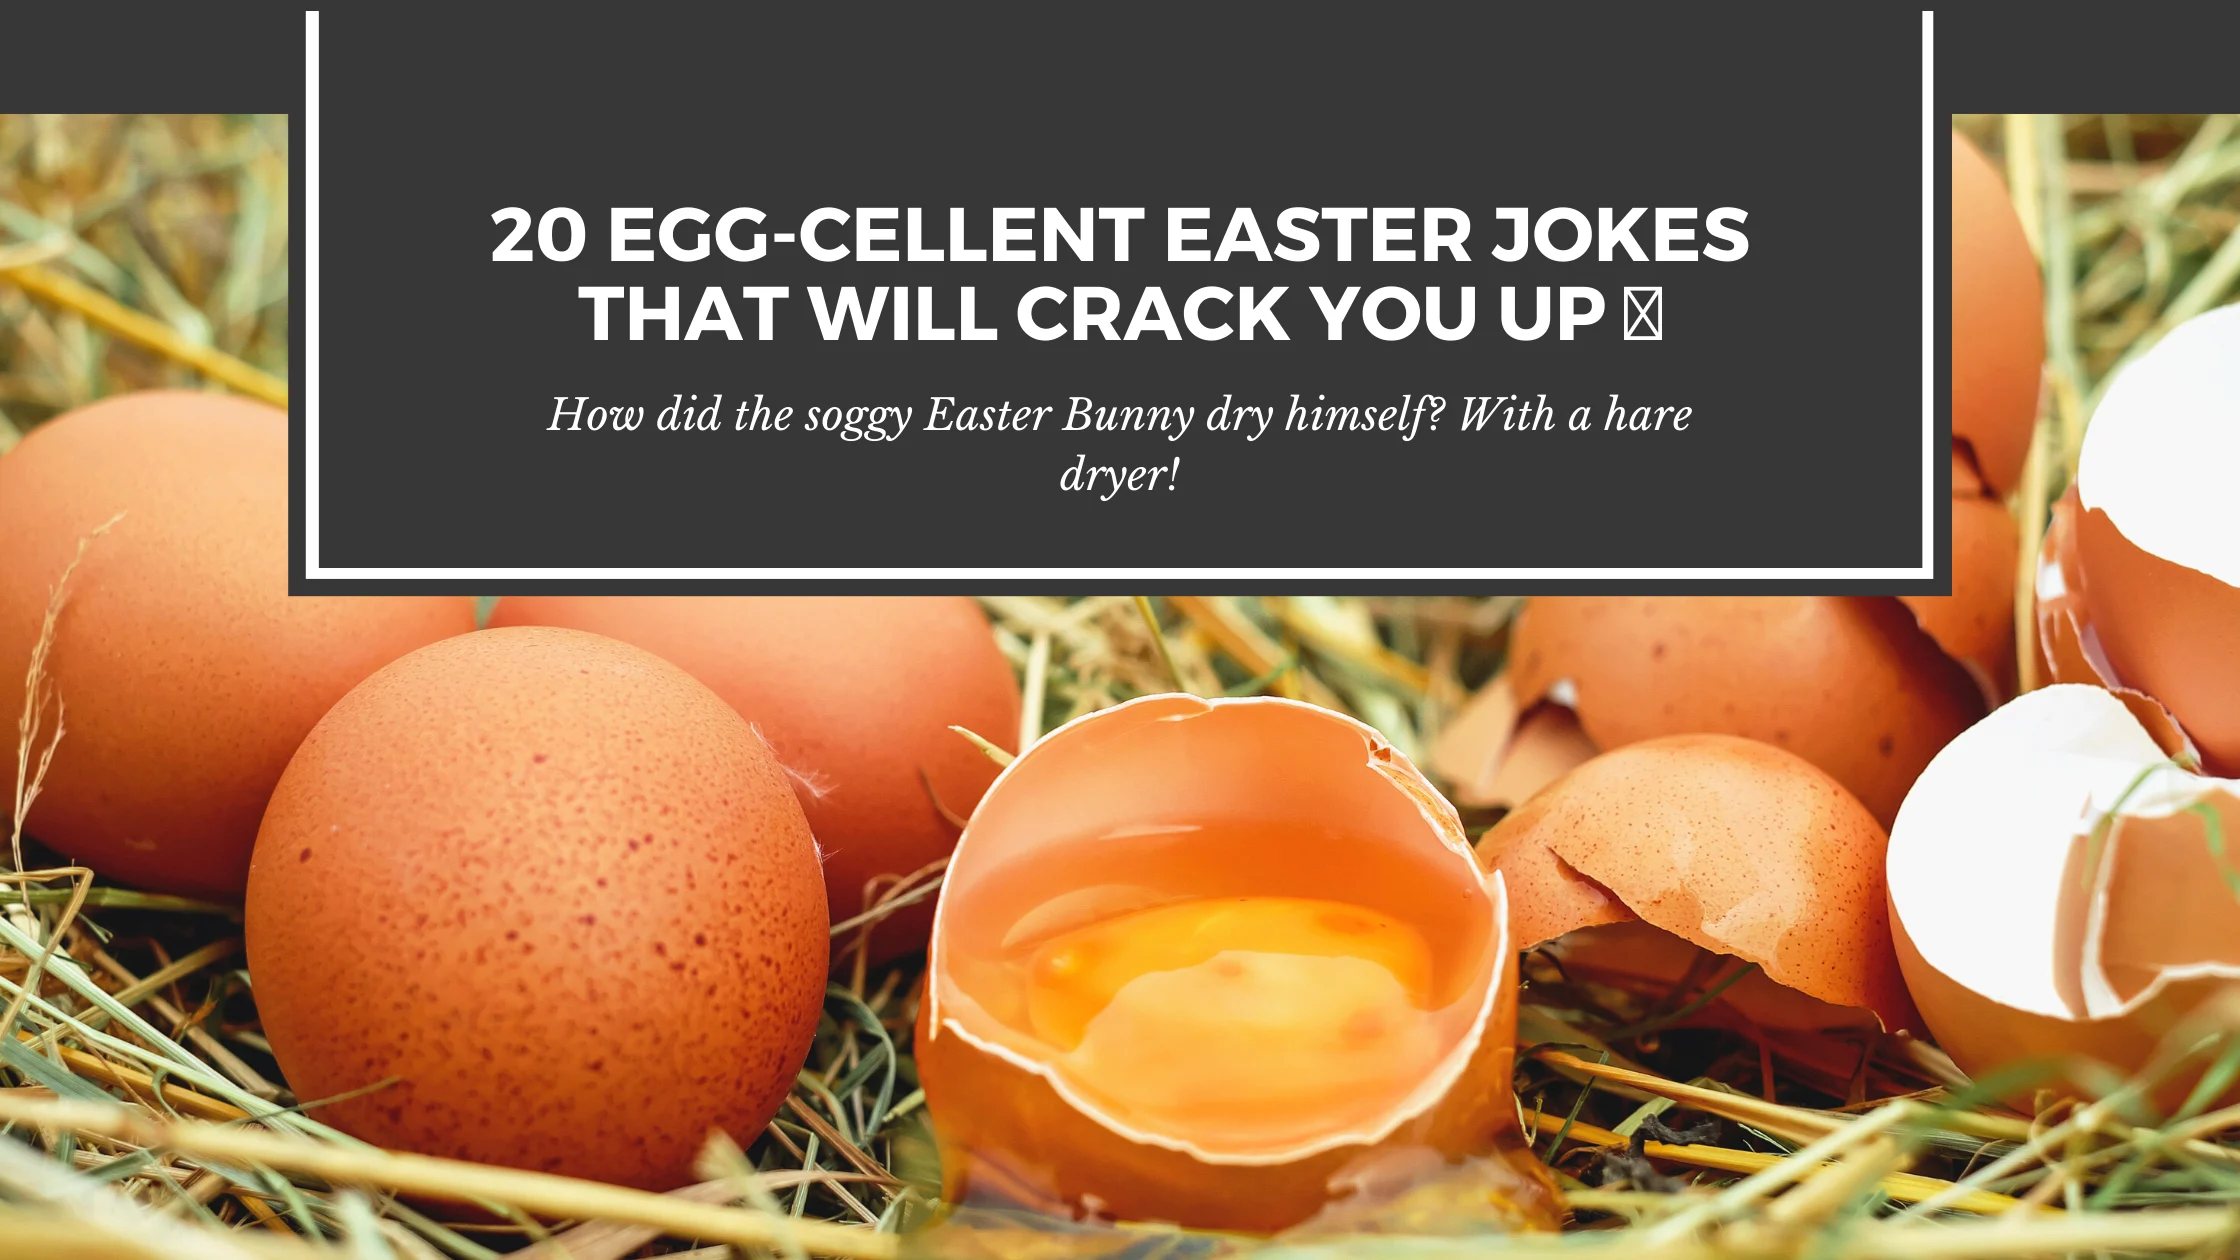  20 Egg-cellent Easter Jokes That Will Crack You Up